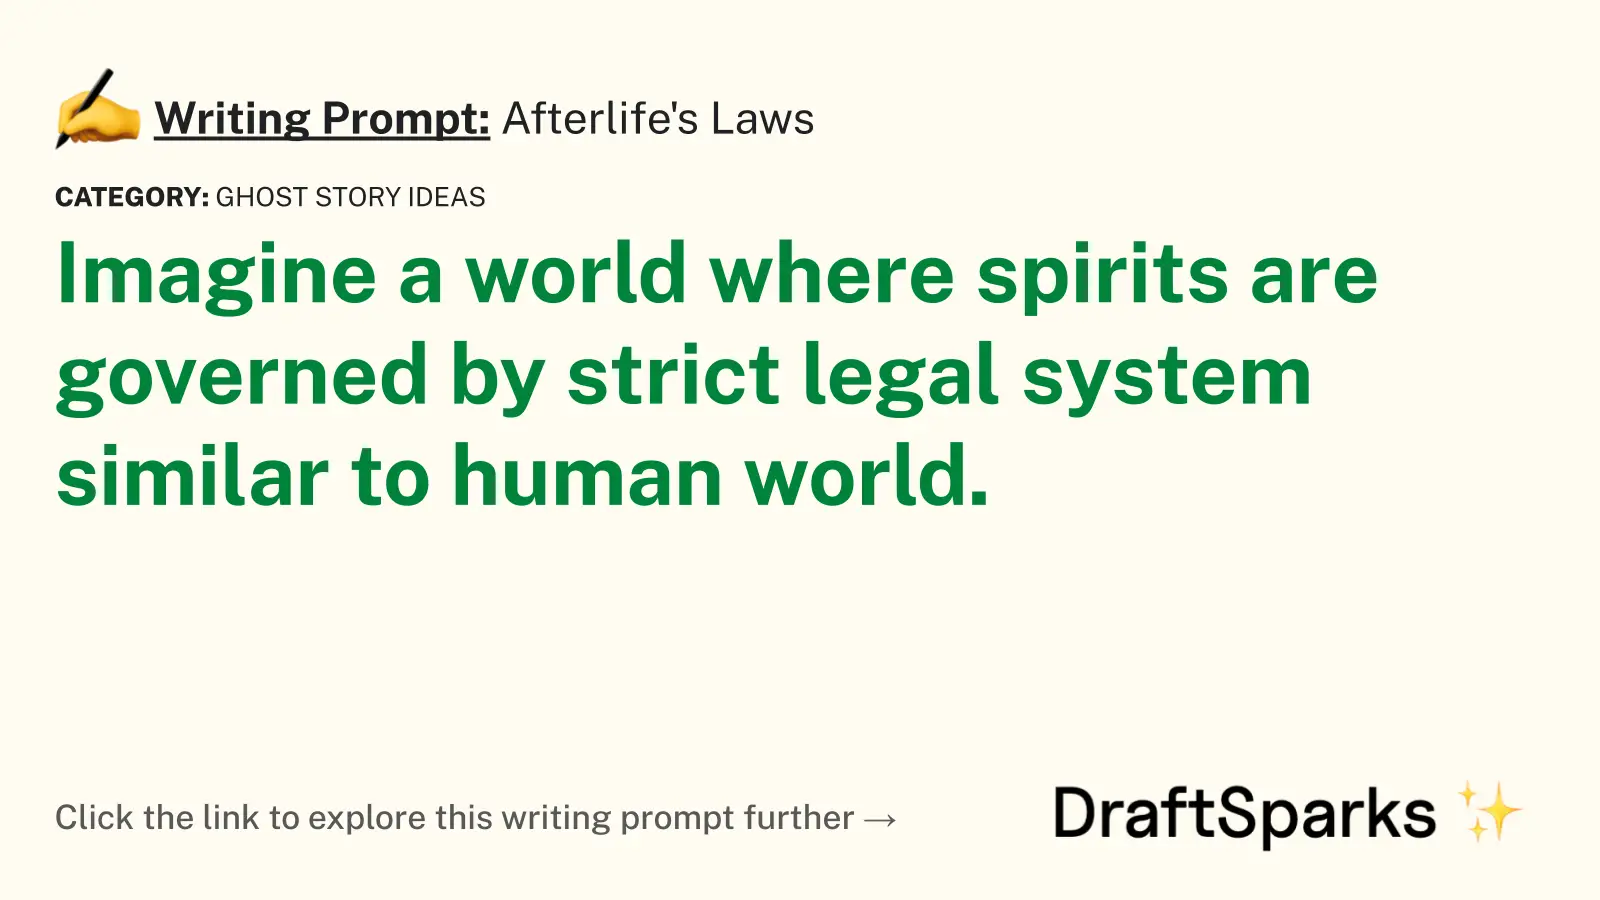 Afterlife’s Laws